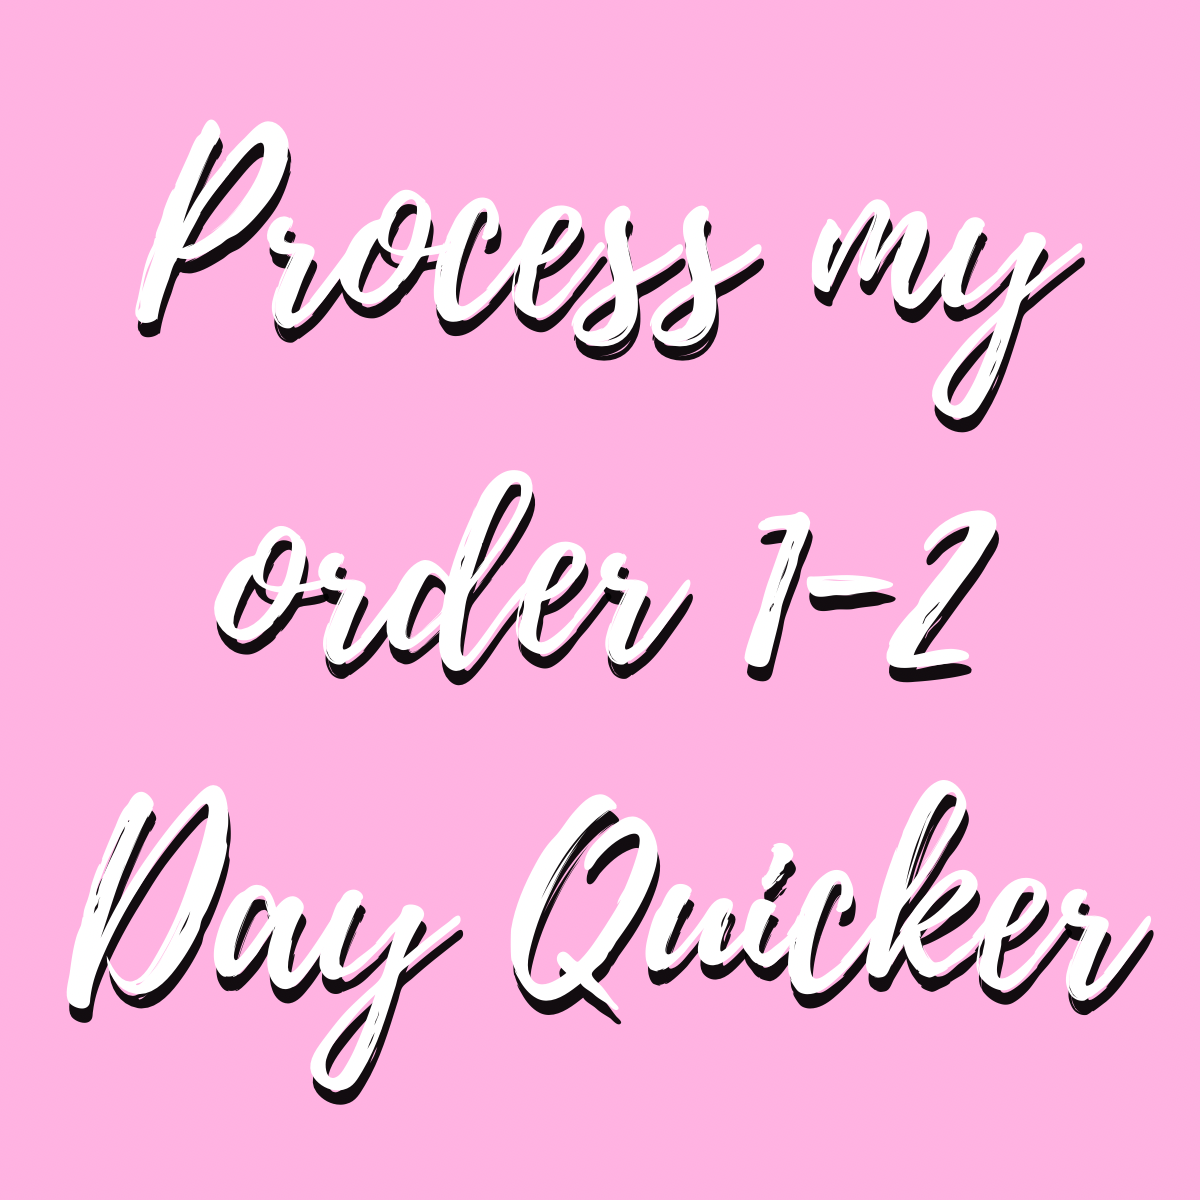 Process my order 1-2 Days Faster